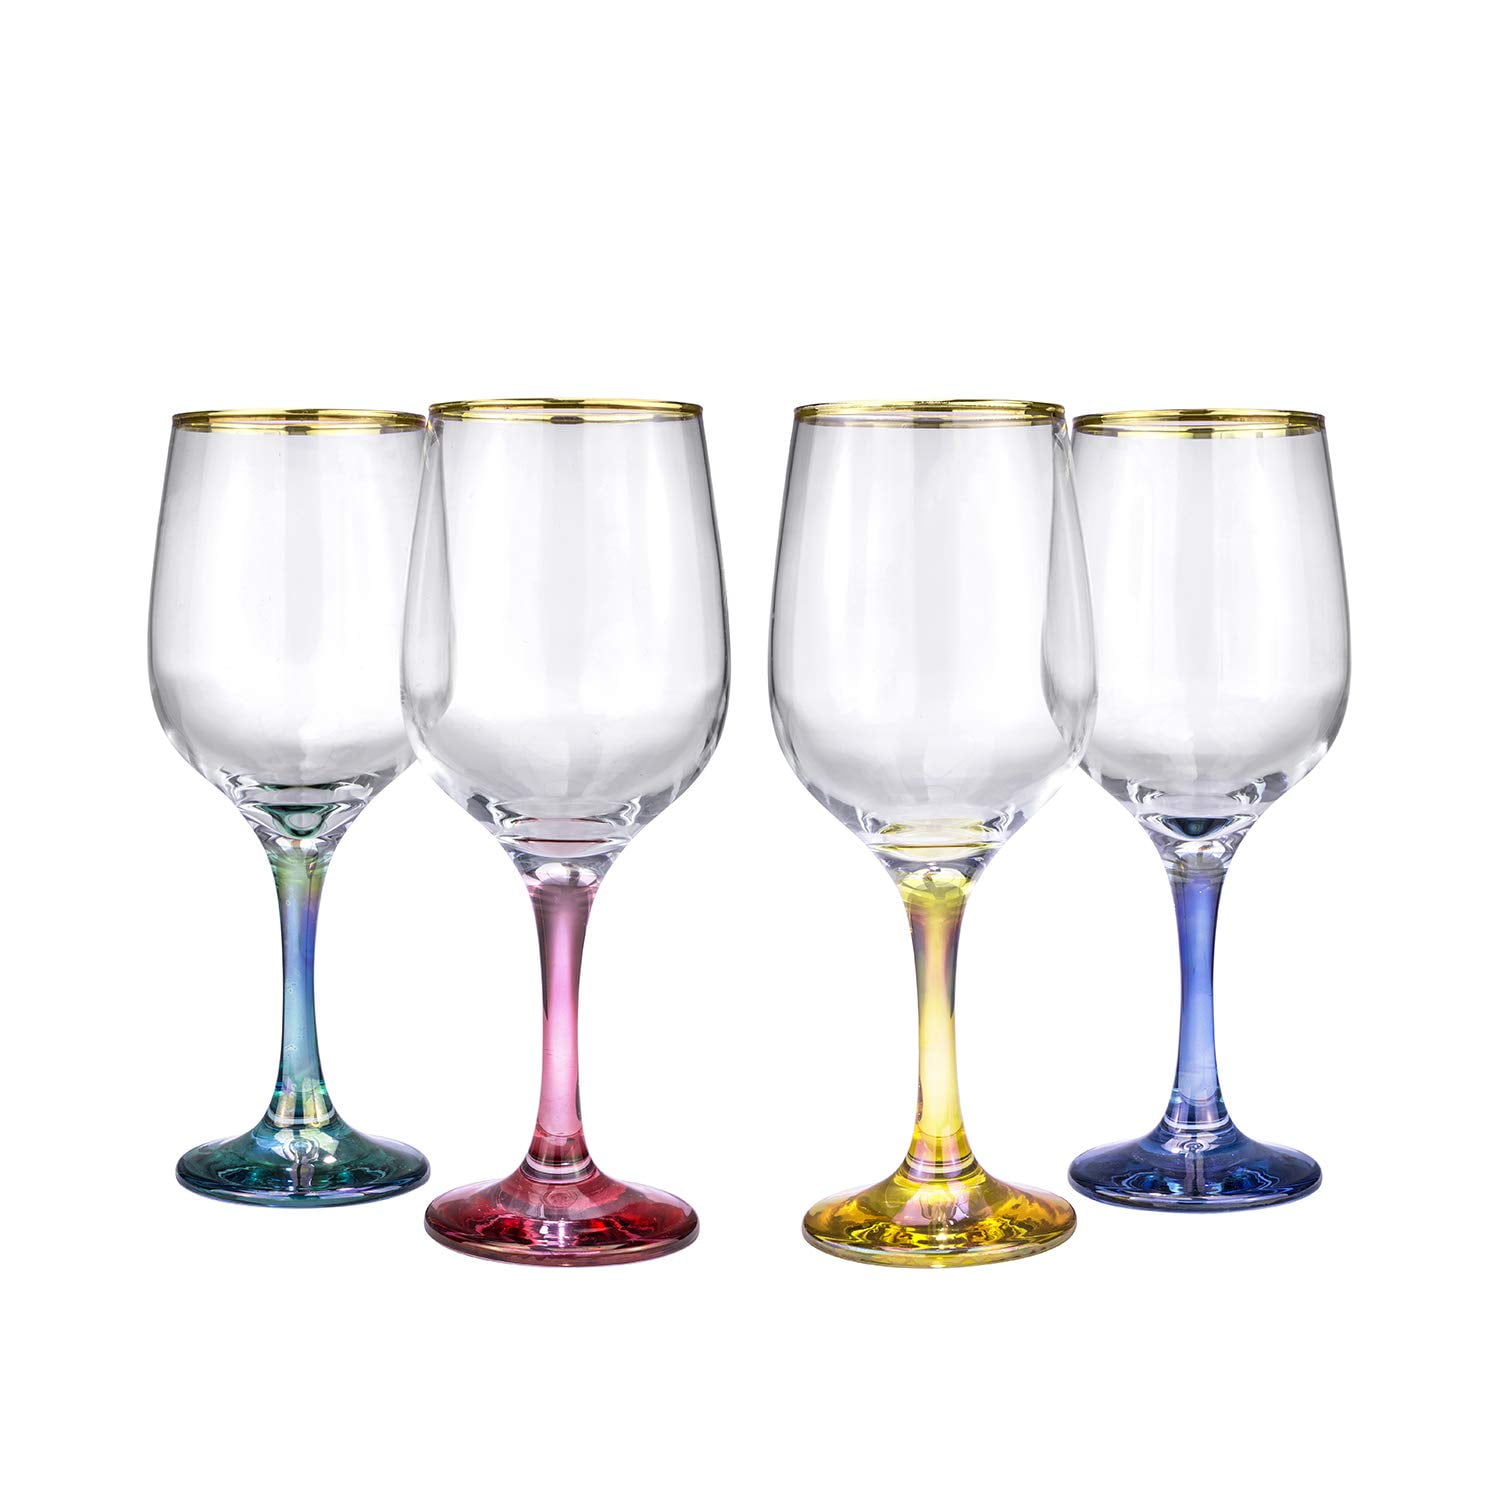 Set of 4 Crystal Wine Glasses, 17.5 Cl, Chantilly Pattern by Cristal De  France. Home Barware, Crystal Glassware, C.1990s 